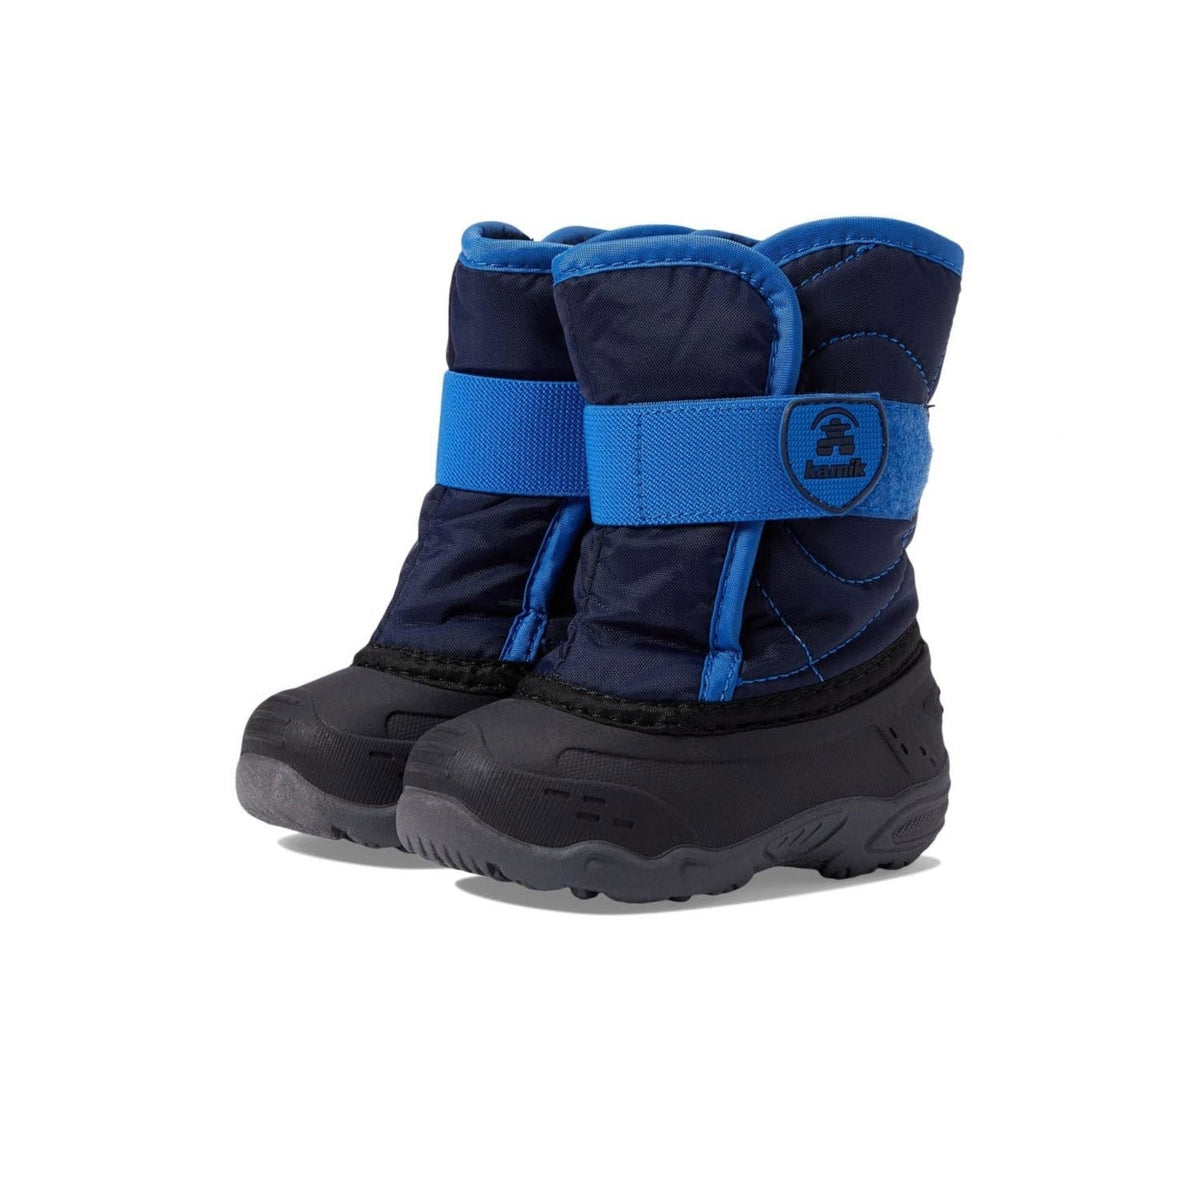 A pair of Kamik SNOWBUG 5 NAVY - TODDLERS blue and black winter boots with velcro straps and waterproof rubber bottoms, isolated on a white background.